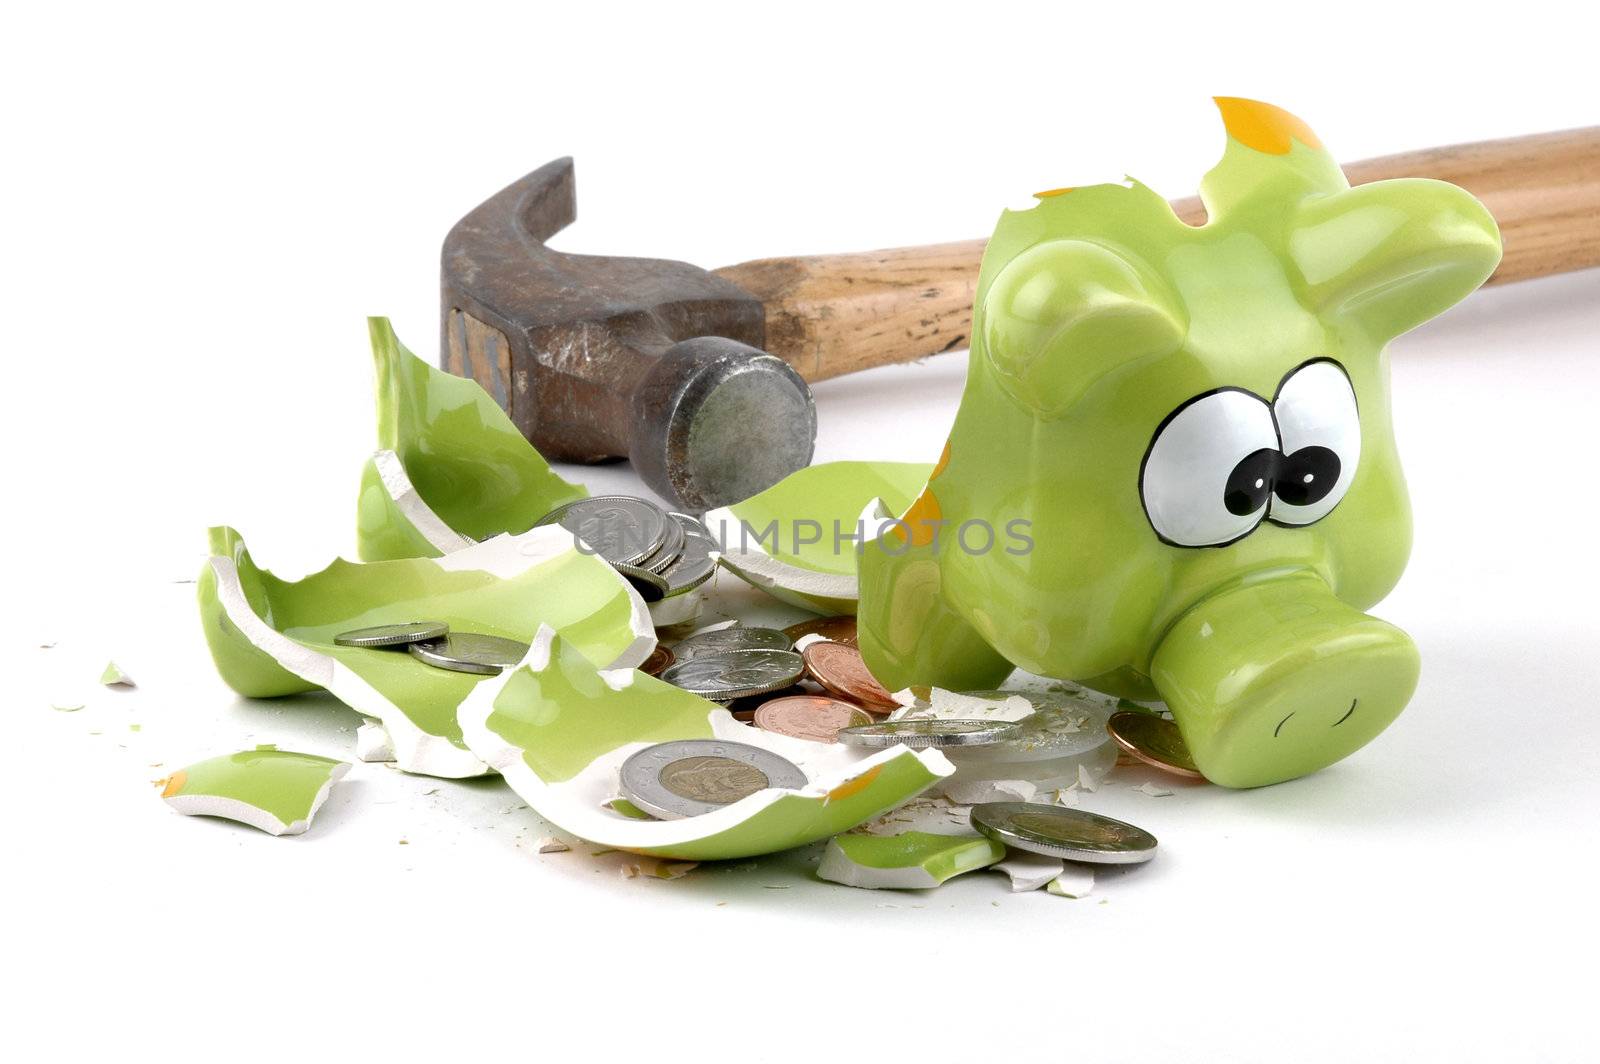 Smashed Piggybank-Canadian by billberryphotography